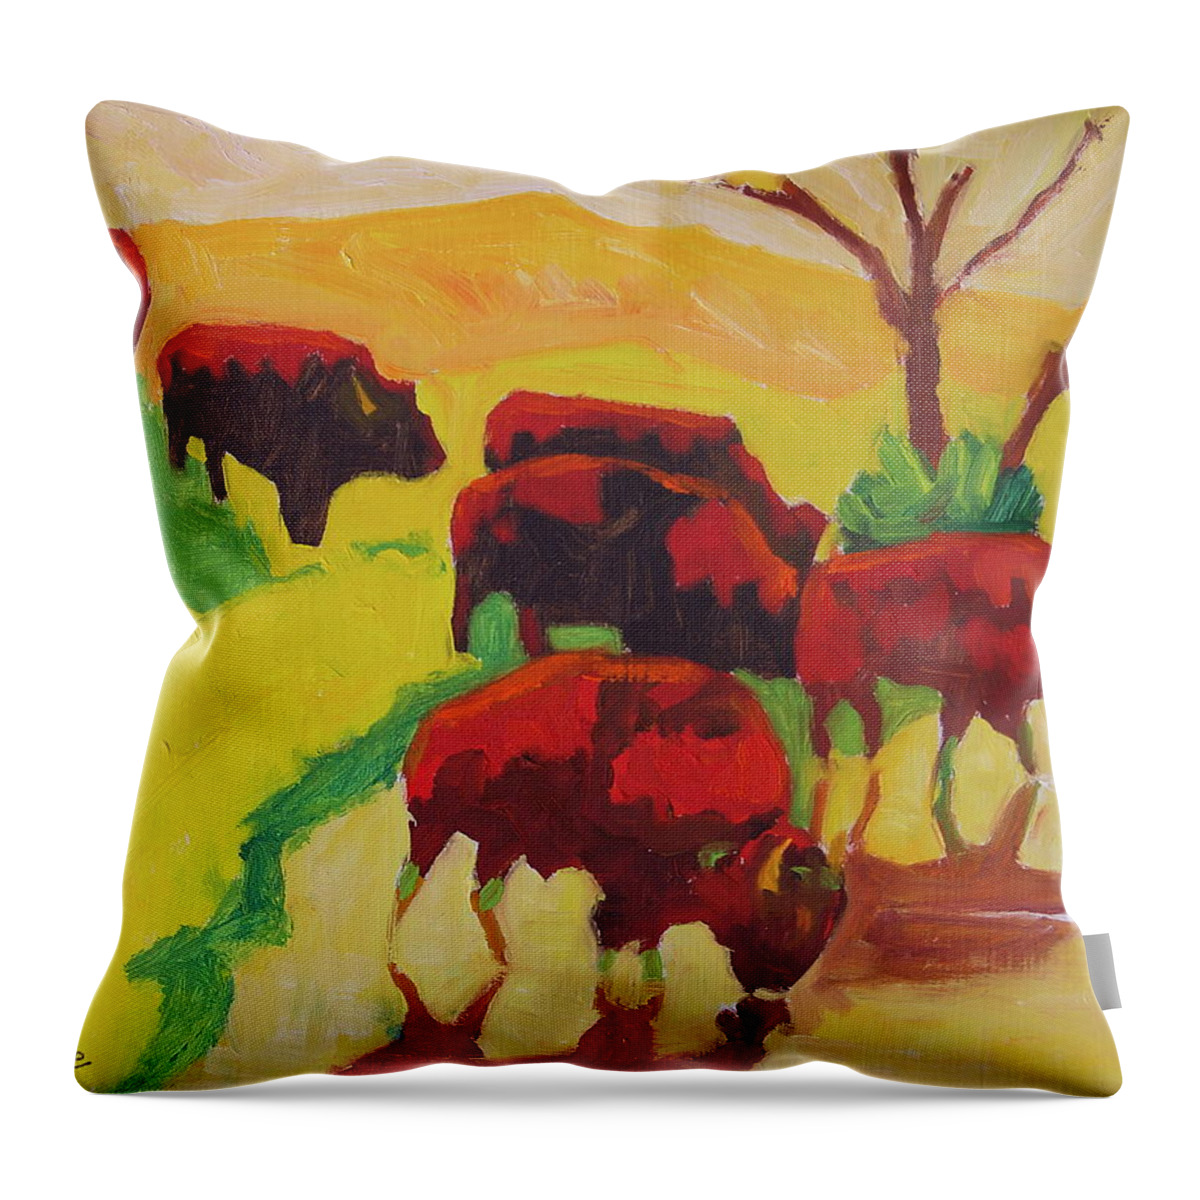 Bison Art Throw Pillow featuring the painting Bison Art Bison Crossing Stream Yellow Hill painting Bertram Poole by Thomas Bertram POOLE